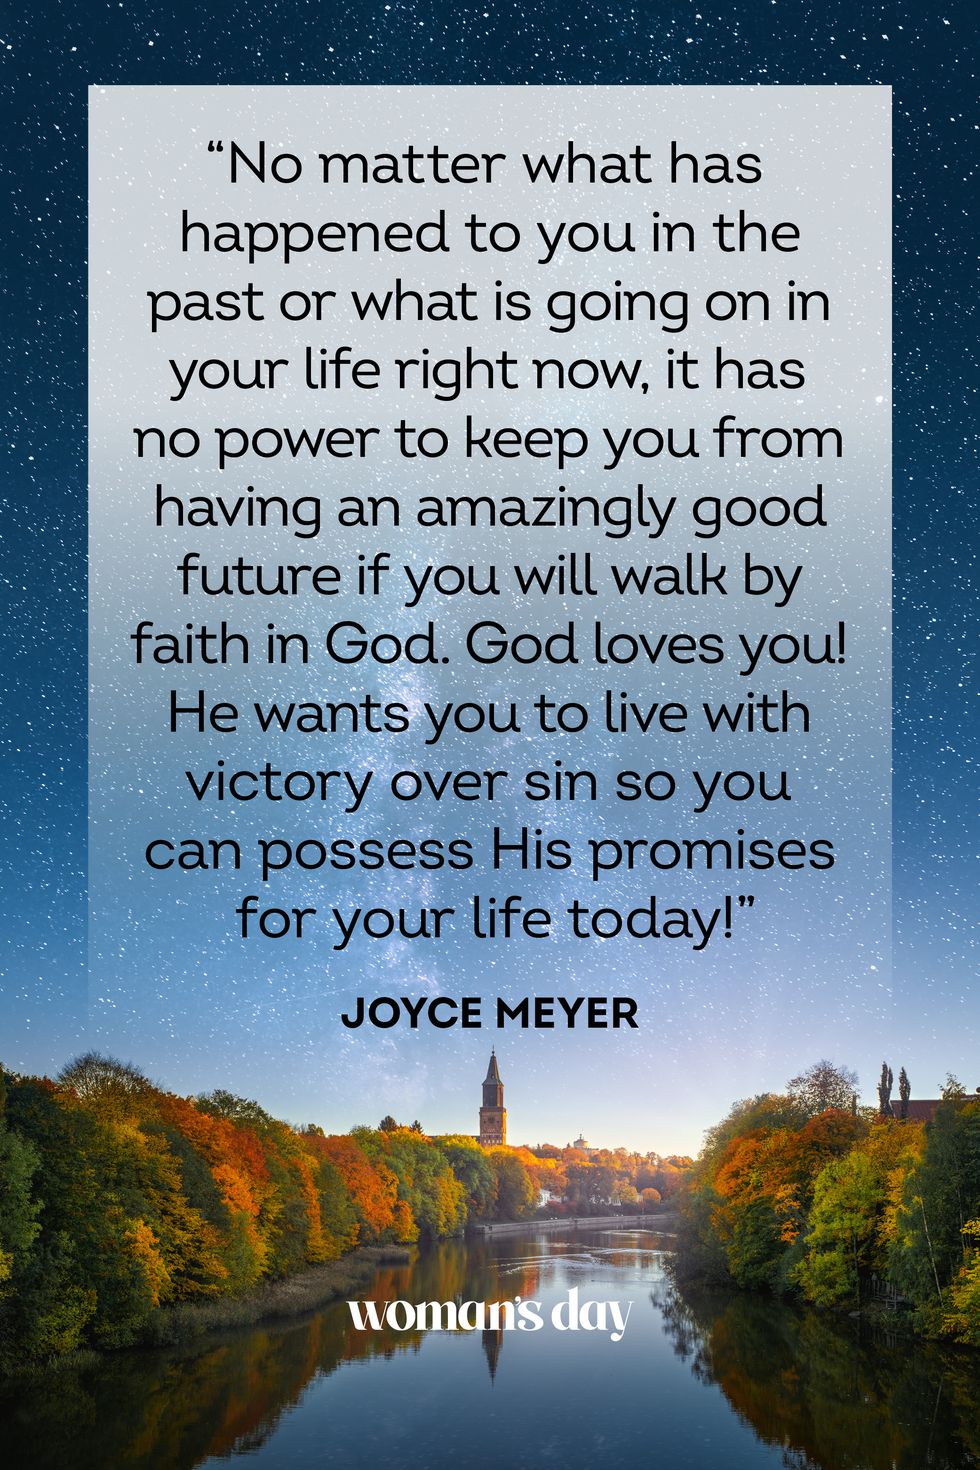 Joyce Meyer quote: Everywhere you look you see people searching for love  but